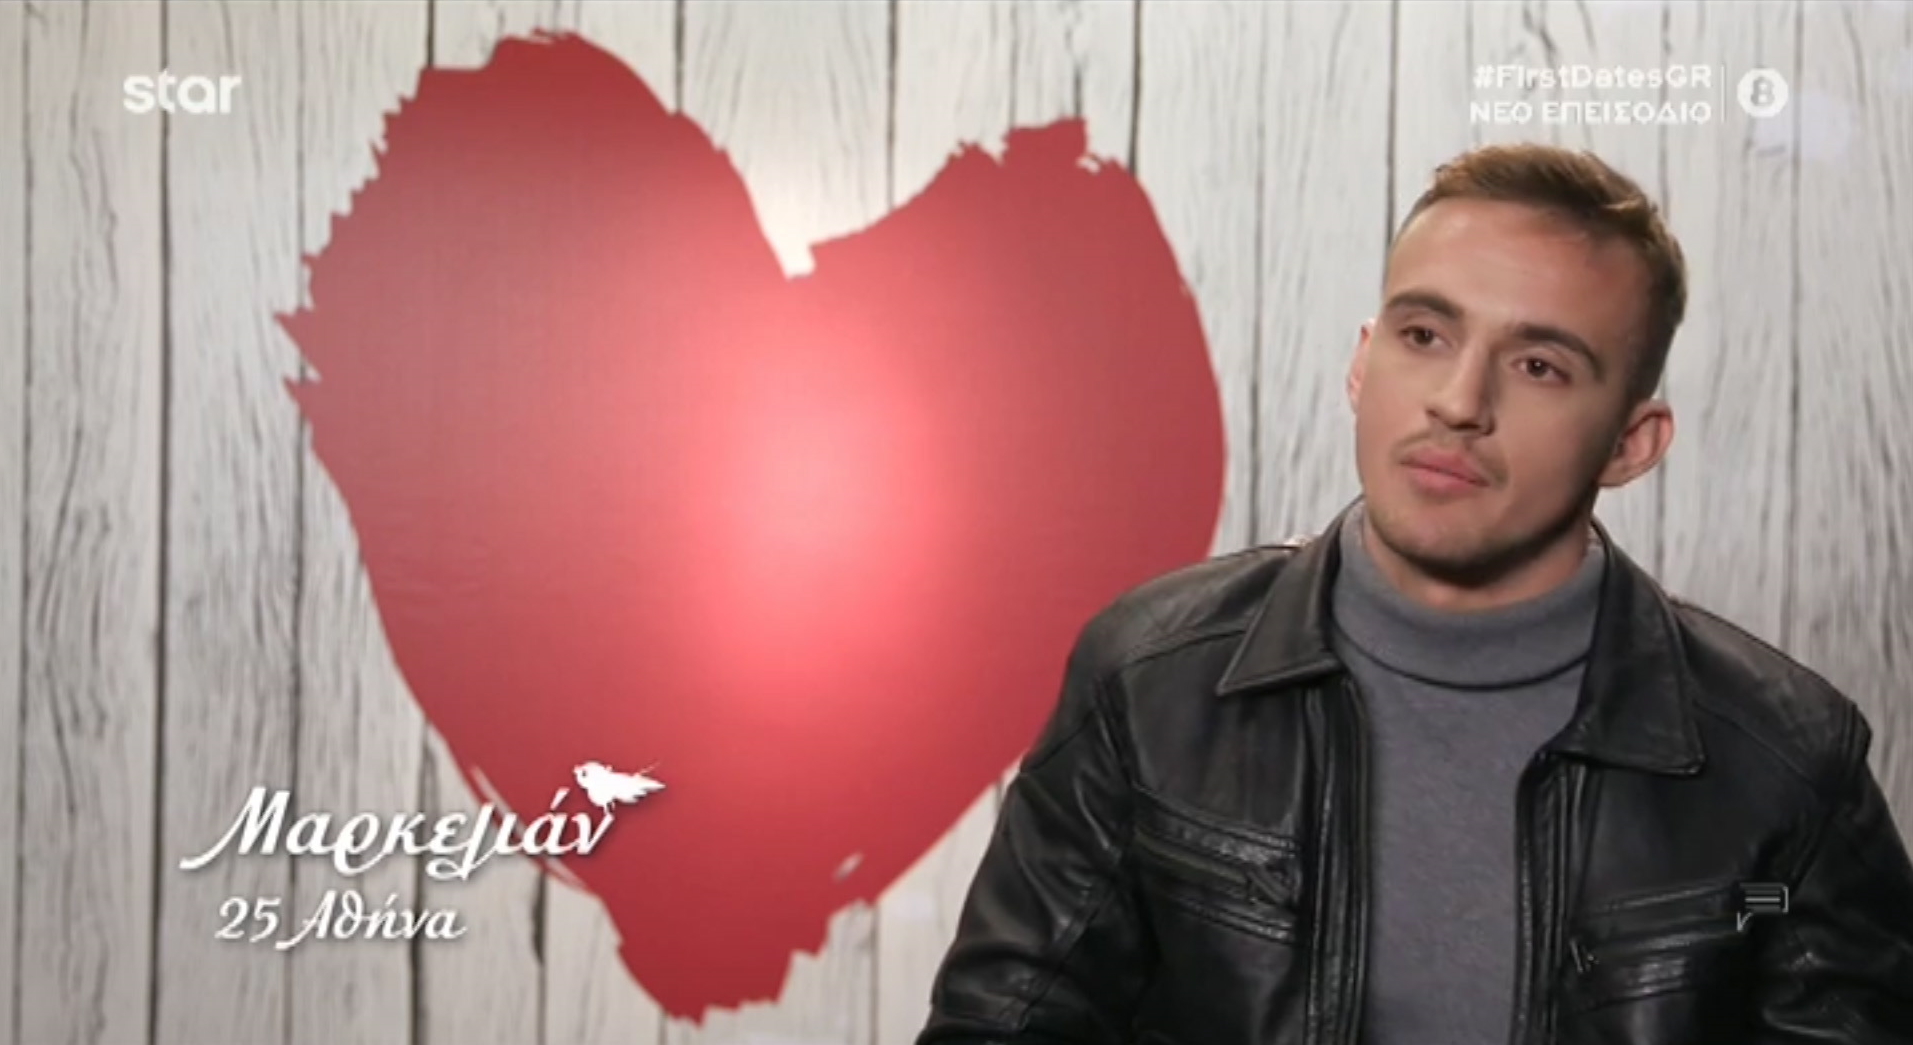 First Dates: “I wish he wasn’t Greek and had hair like a guy”